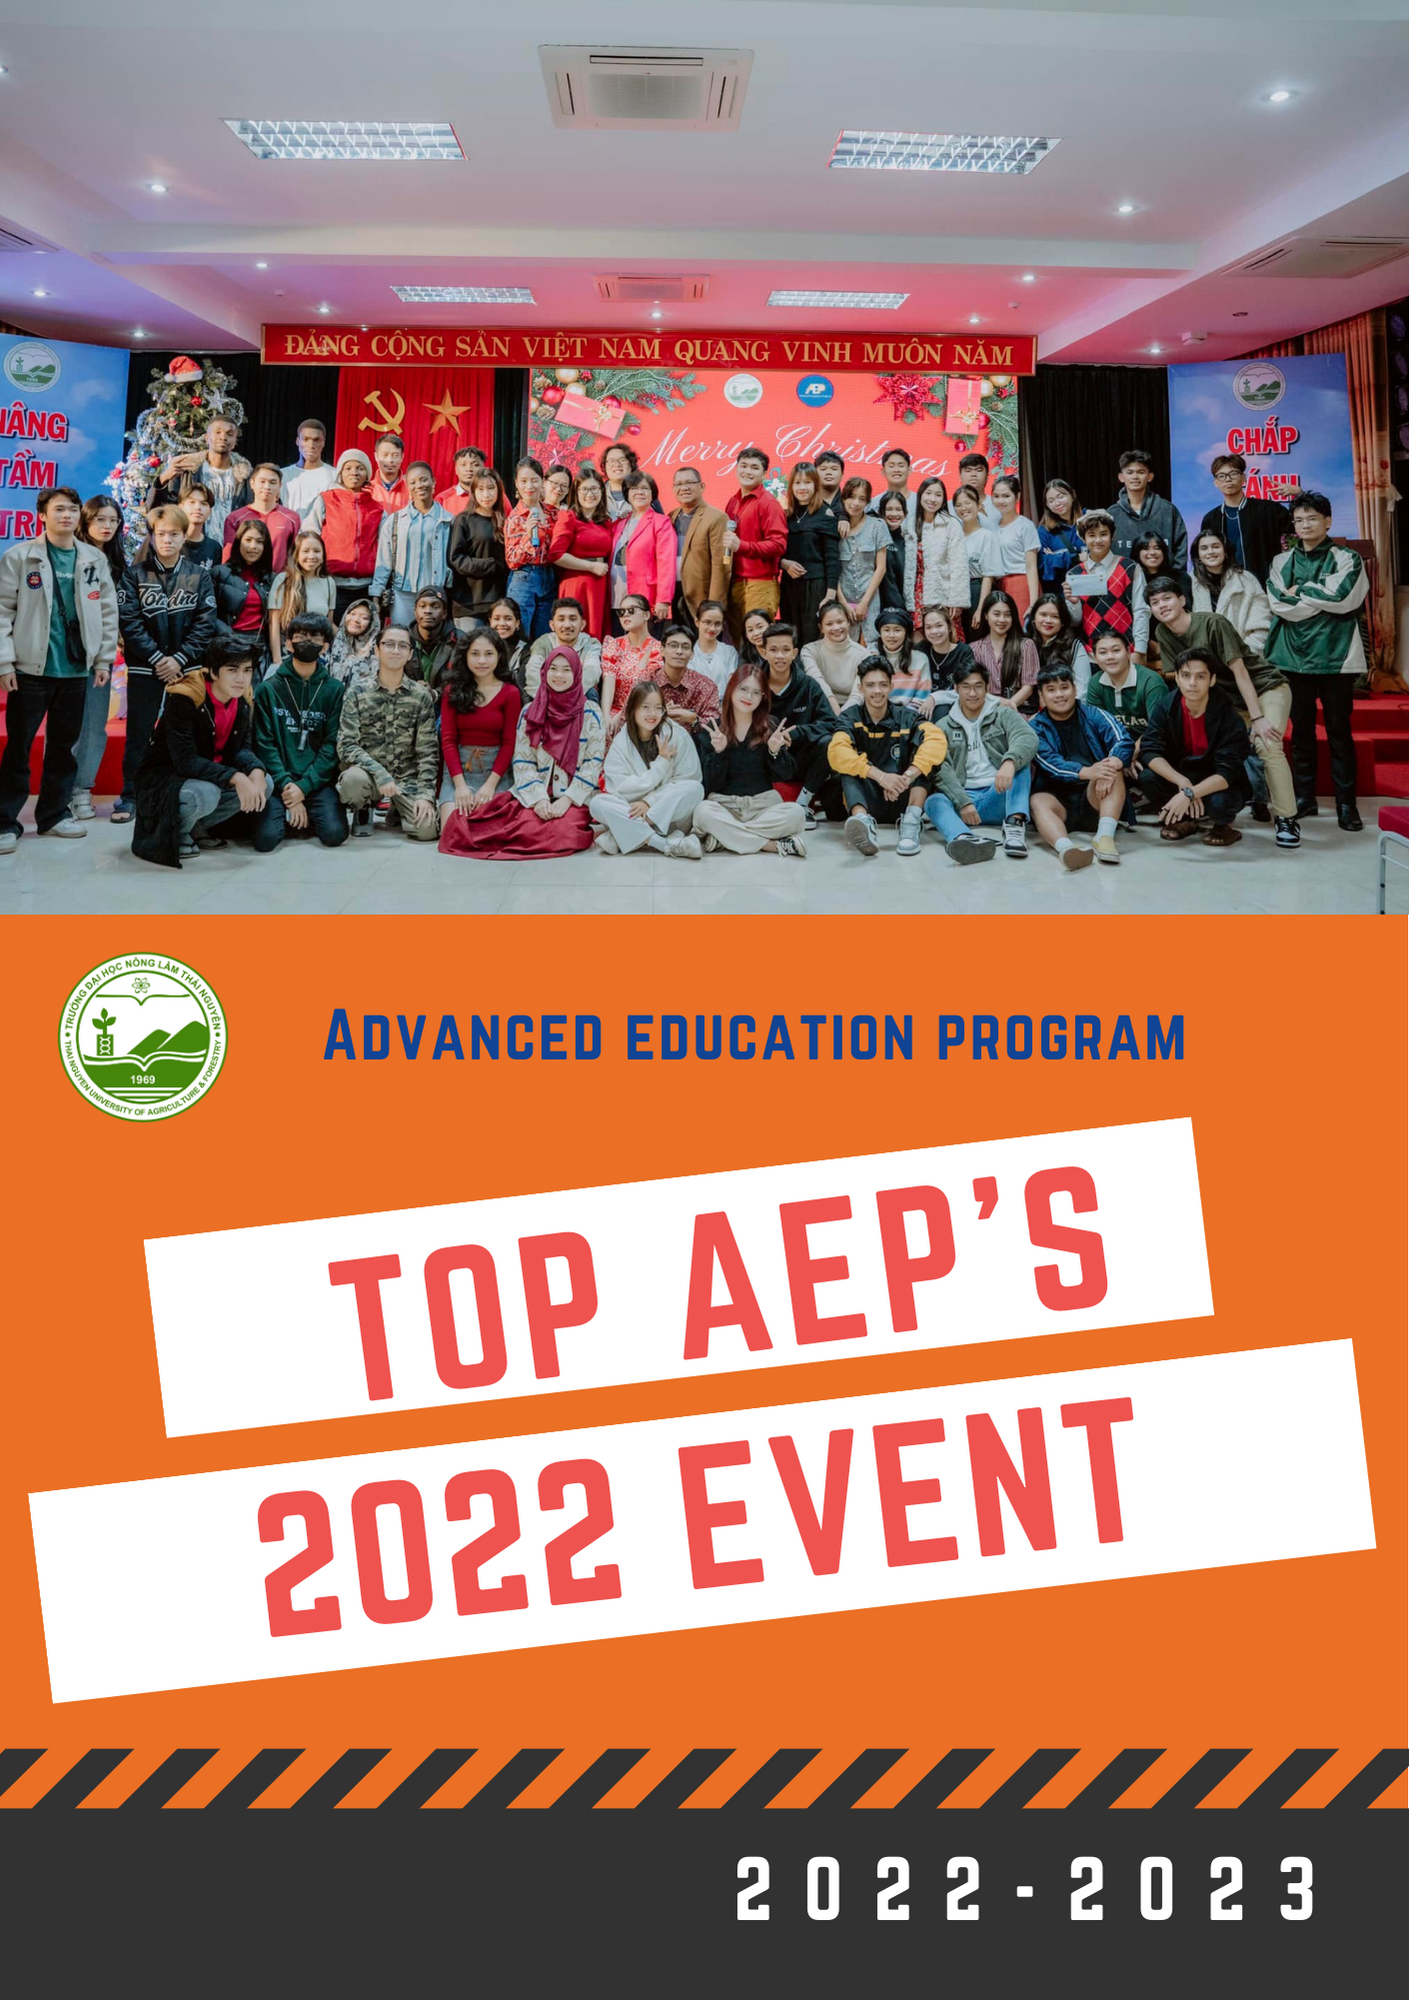 TOP AEP's 2022 EVENTS